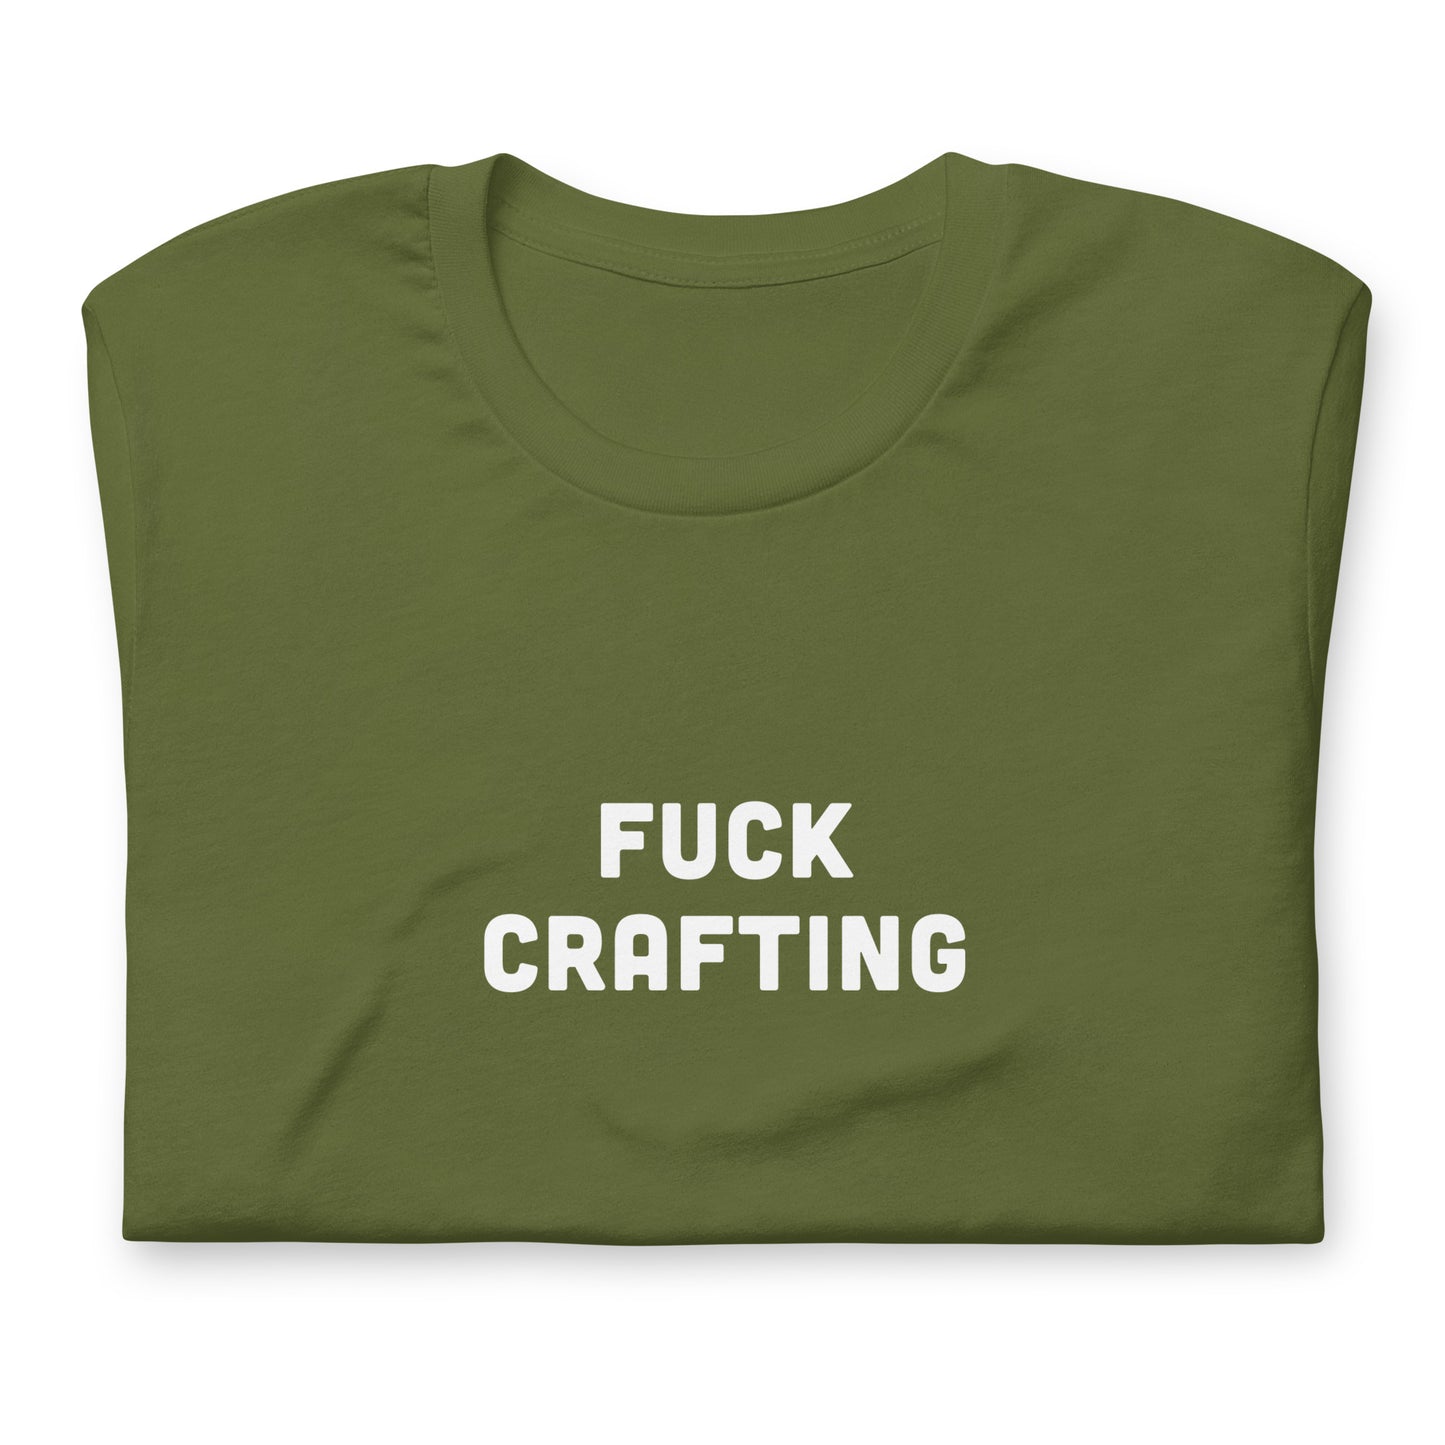 Fuck Crafting T-Shirt Size S Color Navy